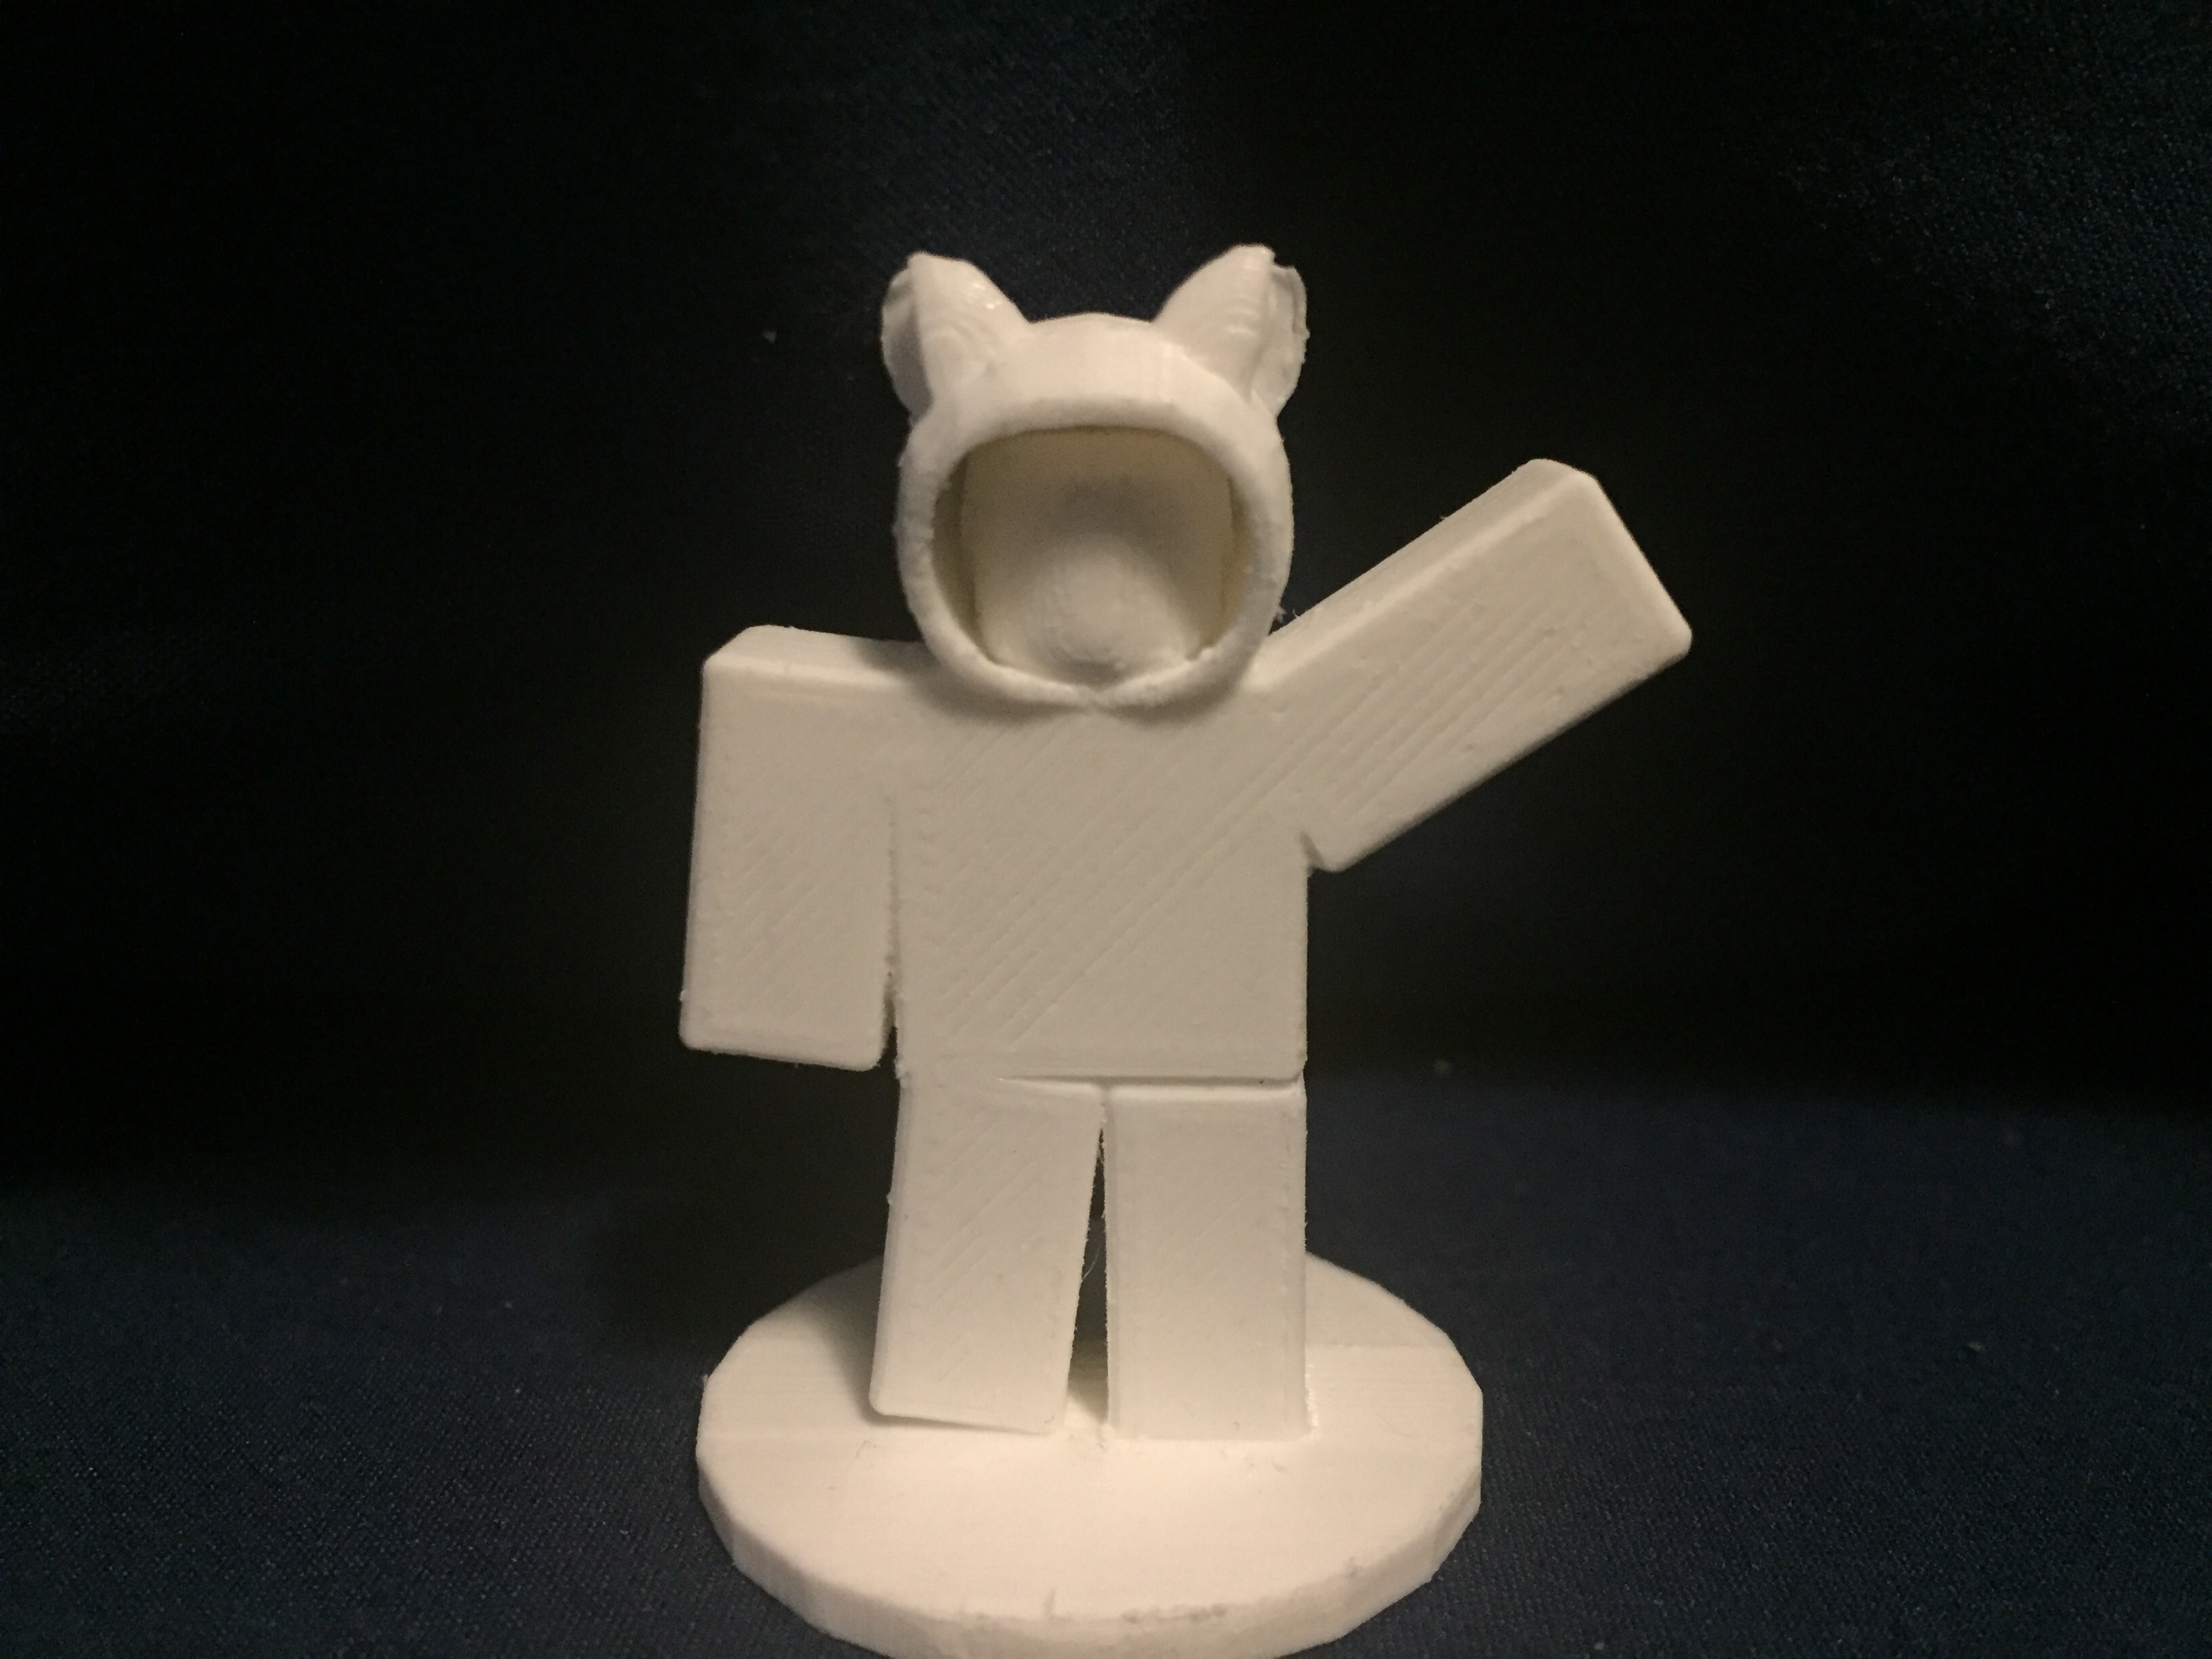 My roblox avatar 3D print. I'm proud of it! My username is neonchameieon.